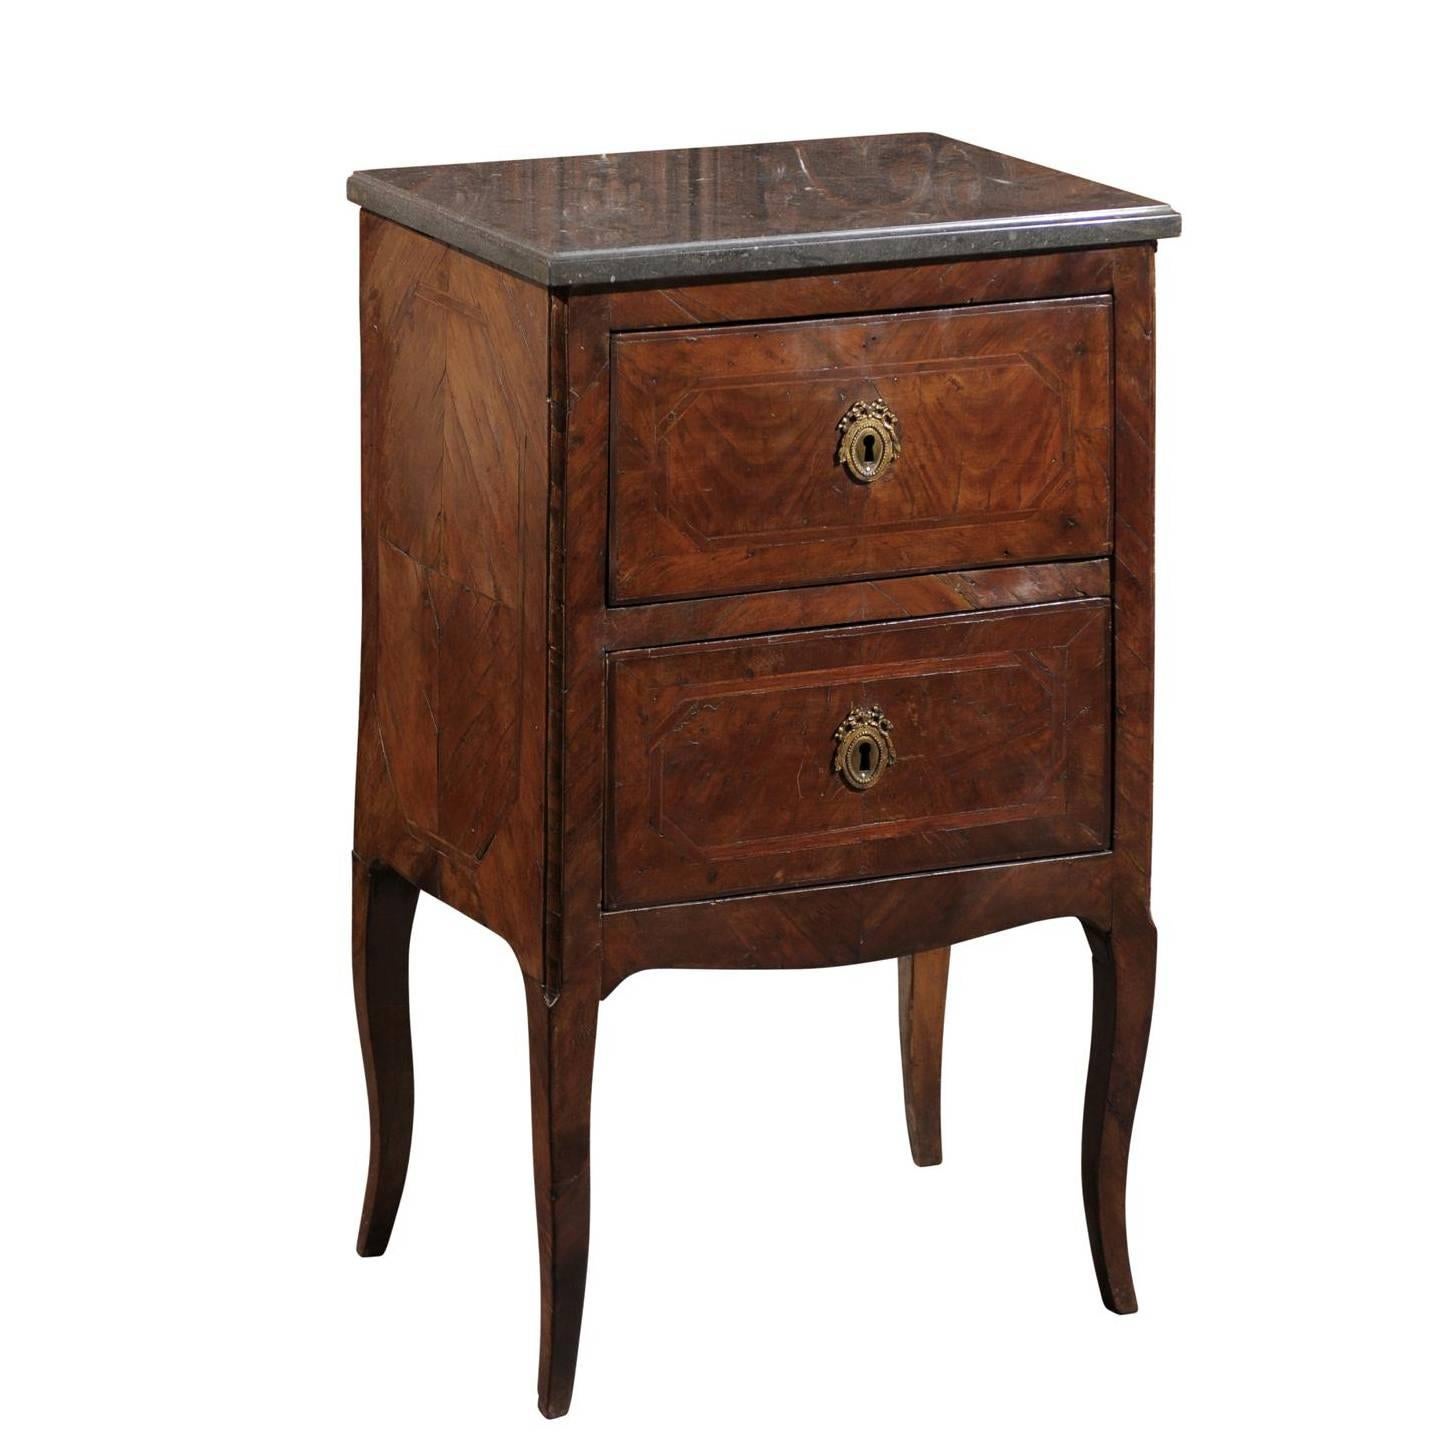 Petite Italian Two-Drawer Commode with Grey Marble Top, circa 1800